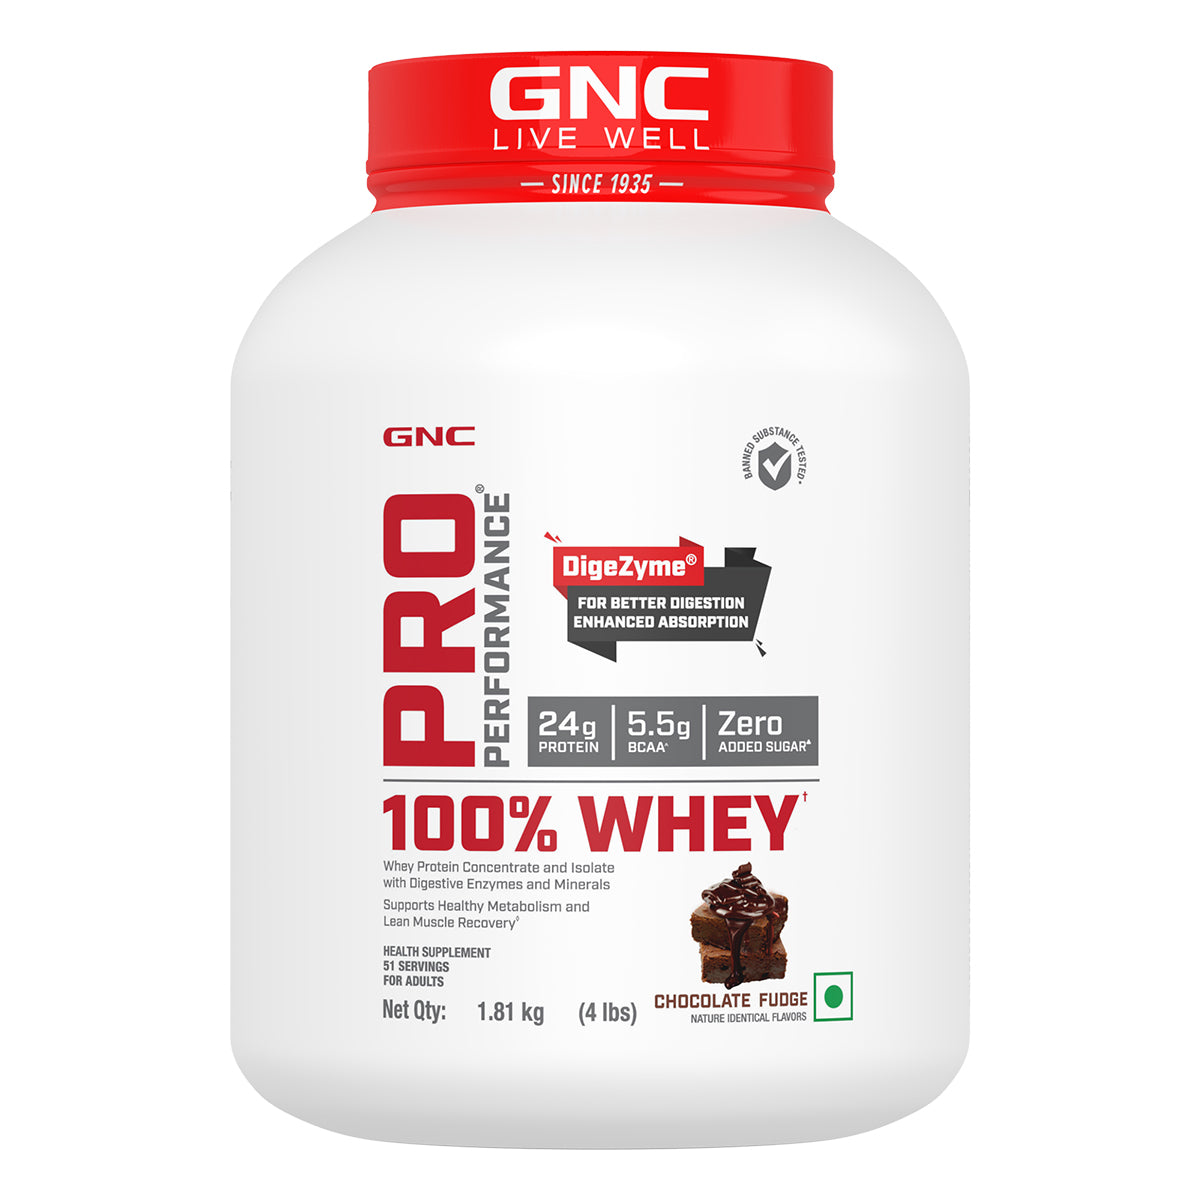 GNC Pro Performance 100% Whey Protein - Faster Recovery & Lean Muscle Gains | Informed Choice Certified